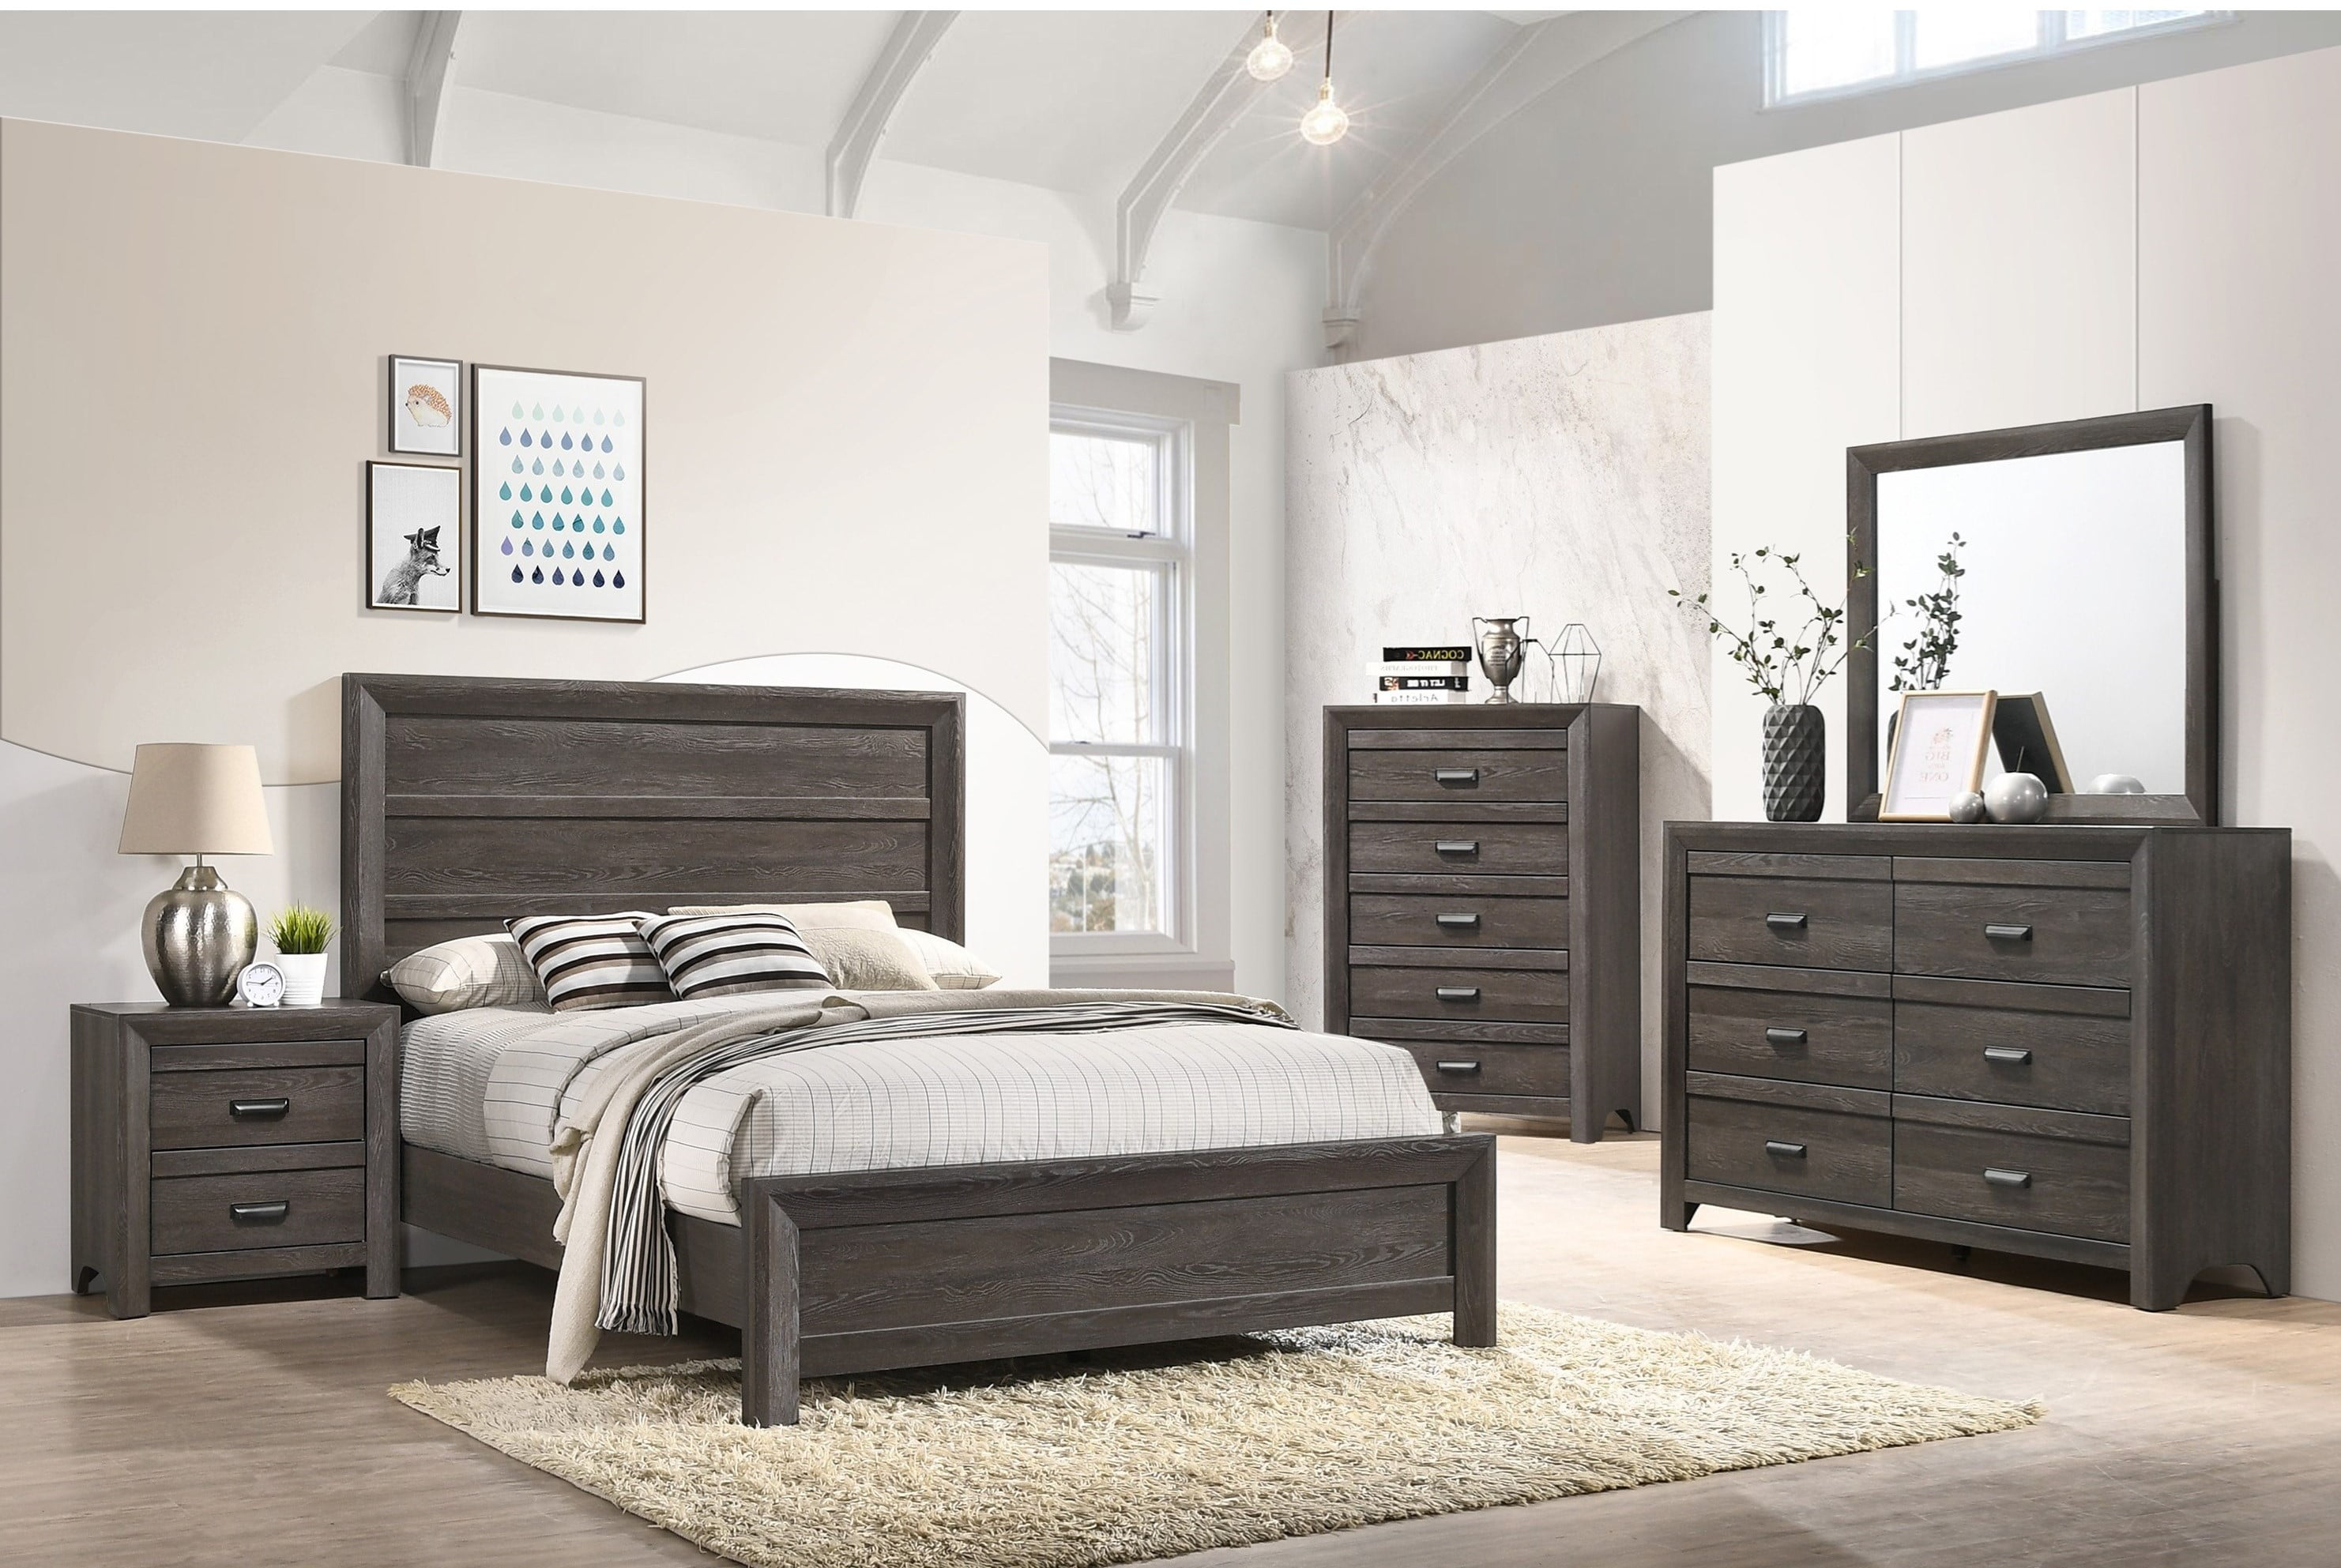 4pc Full Size Bed Set Contemporary Bedroom Furniture Dresser Mirror Nightstand Multi-Colored Brown Finish